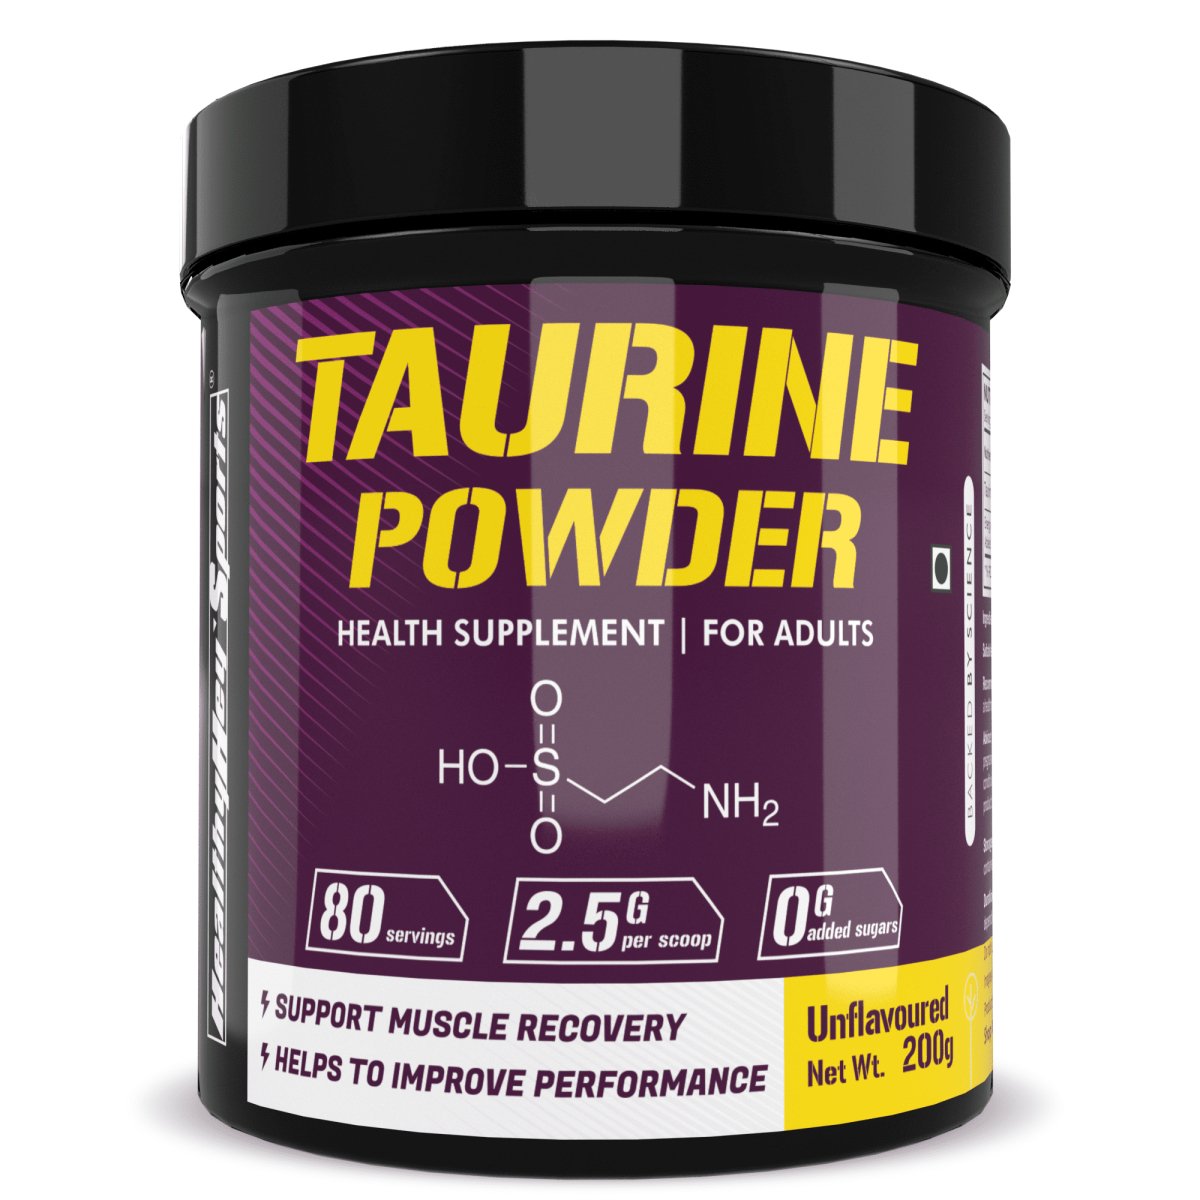 Taurine Powder, Support Muscle Recovery -Amino Acid Supplement - Improve Performance & Helps Recovery - 200 gram - 80 Servings - HealthyHey Nutrition